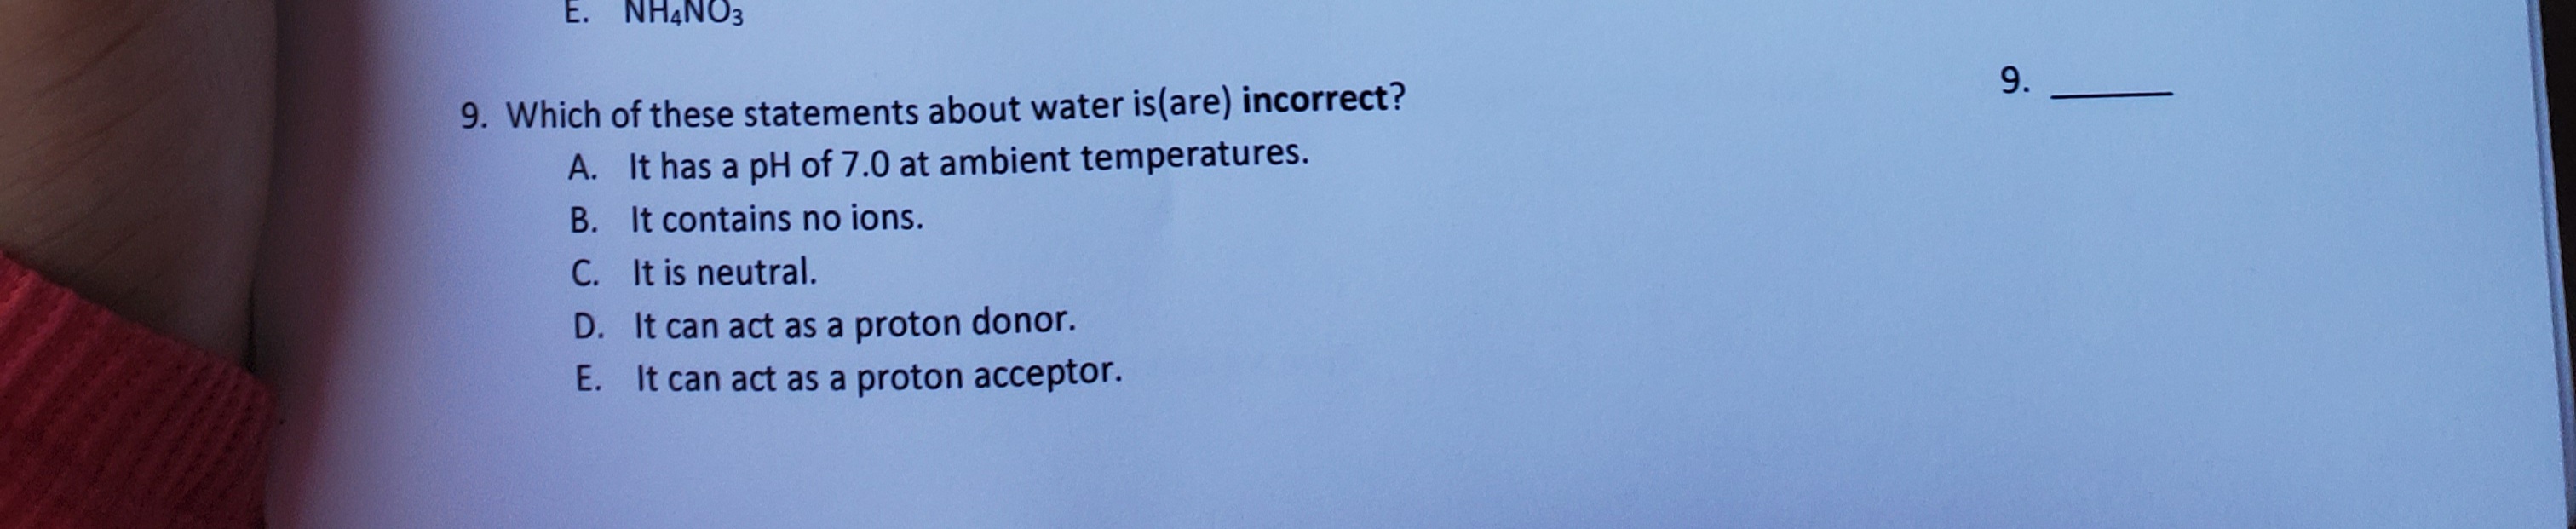 9. Which of these statements about water is(are) incorrect?
A. It has a pH of 7.0 at ambient temperatures.
B. It contains no ions.
C. It is neutral.
D. It can act as a proton donor.
